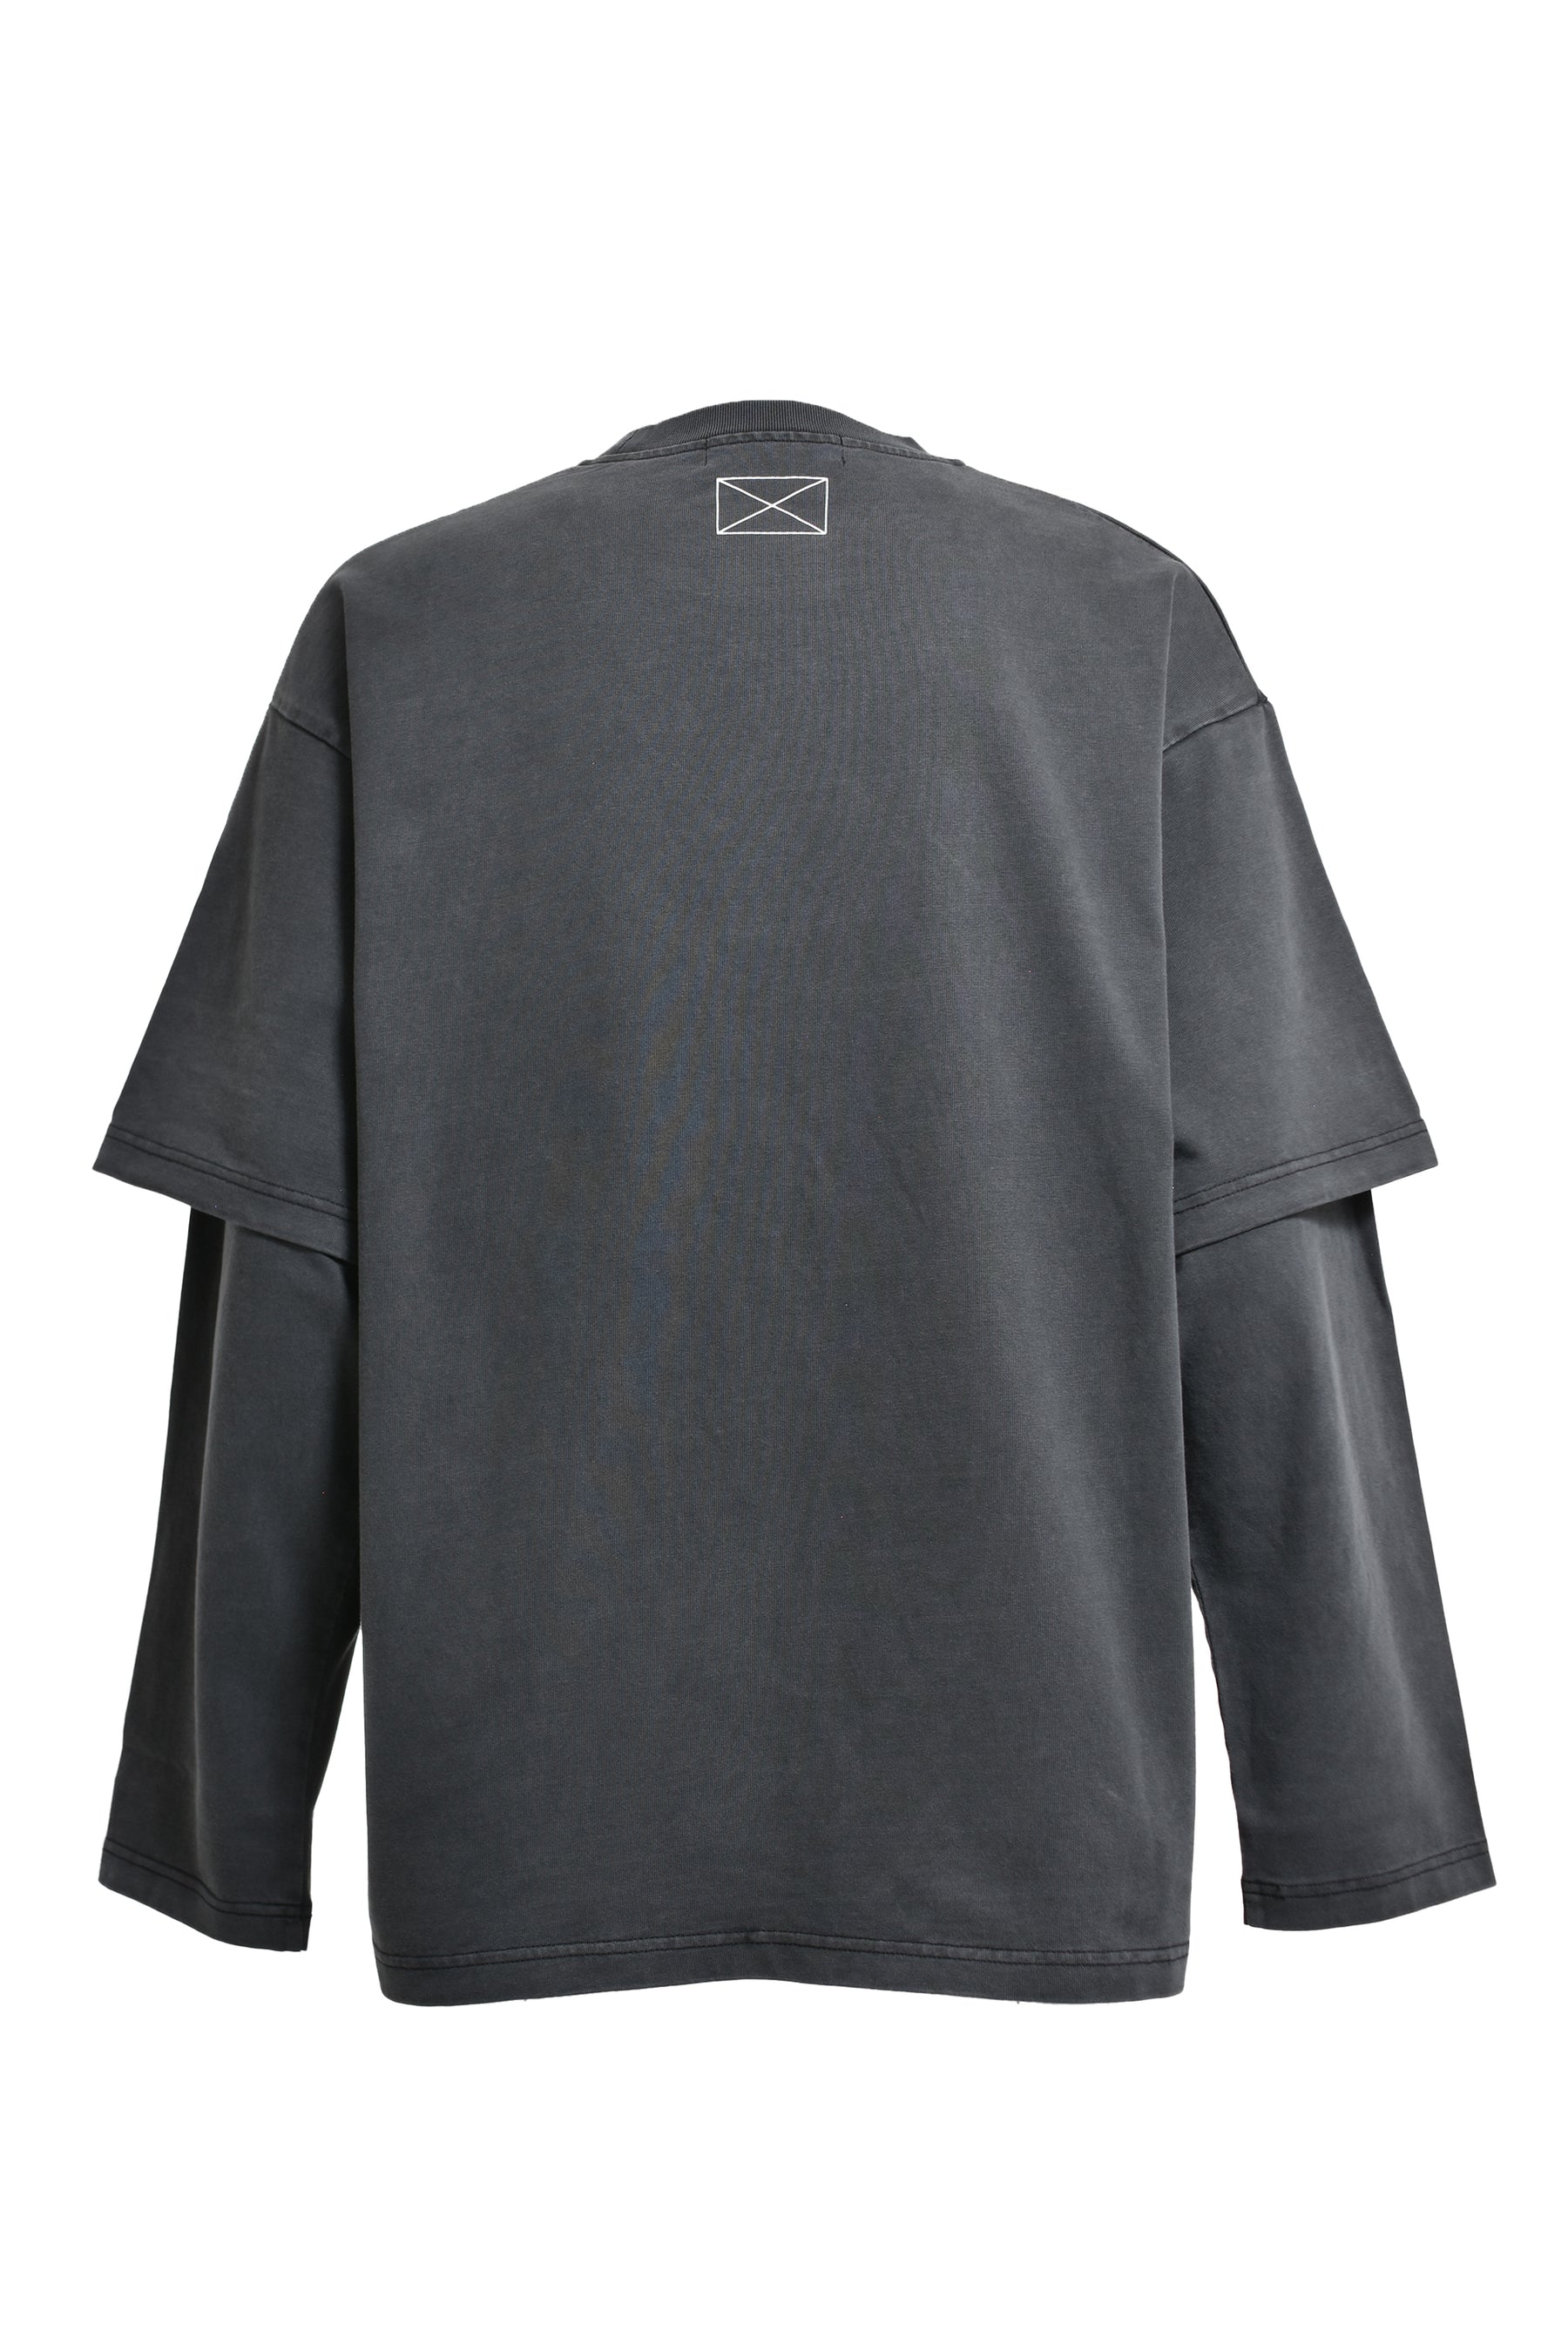 MLVINCE FW23 SEVEN STARS LAYERED L/S TEE / WASHED BLK -NUBIAN